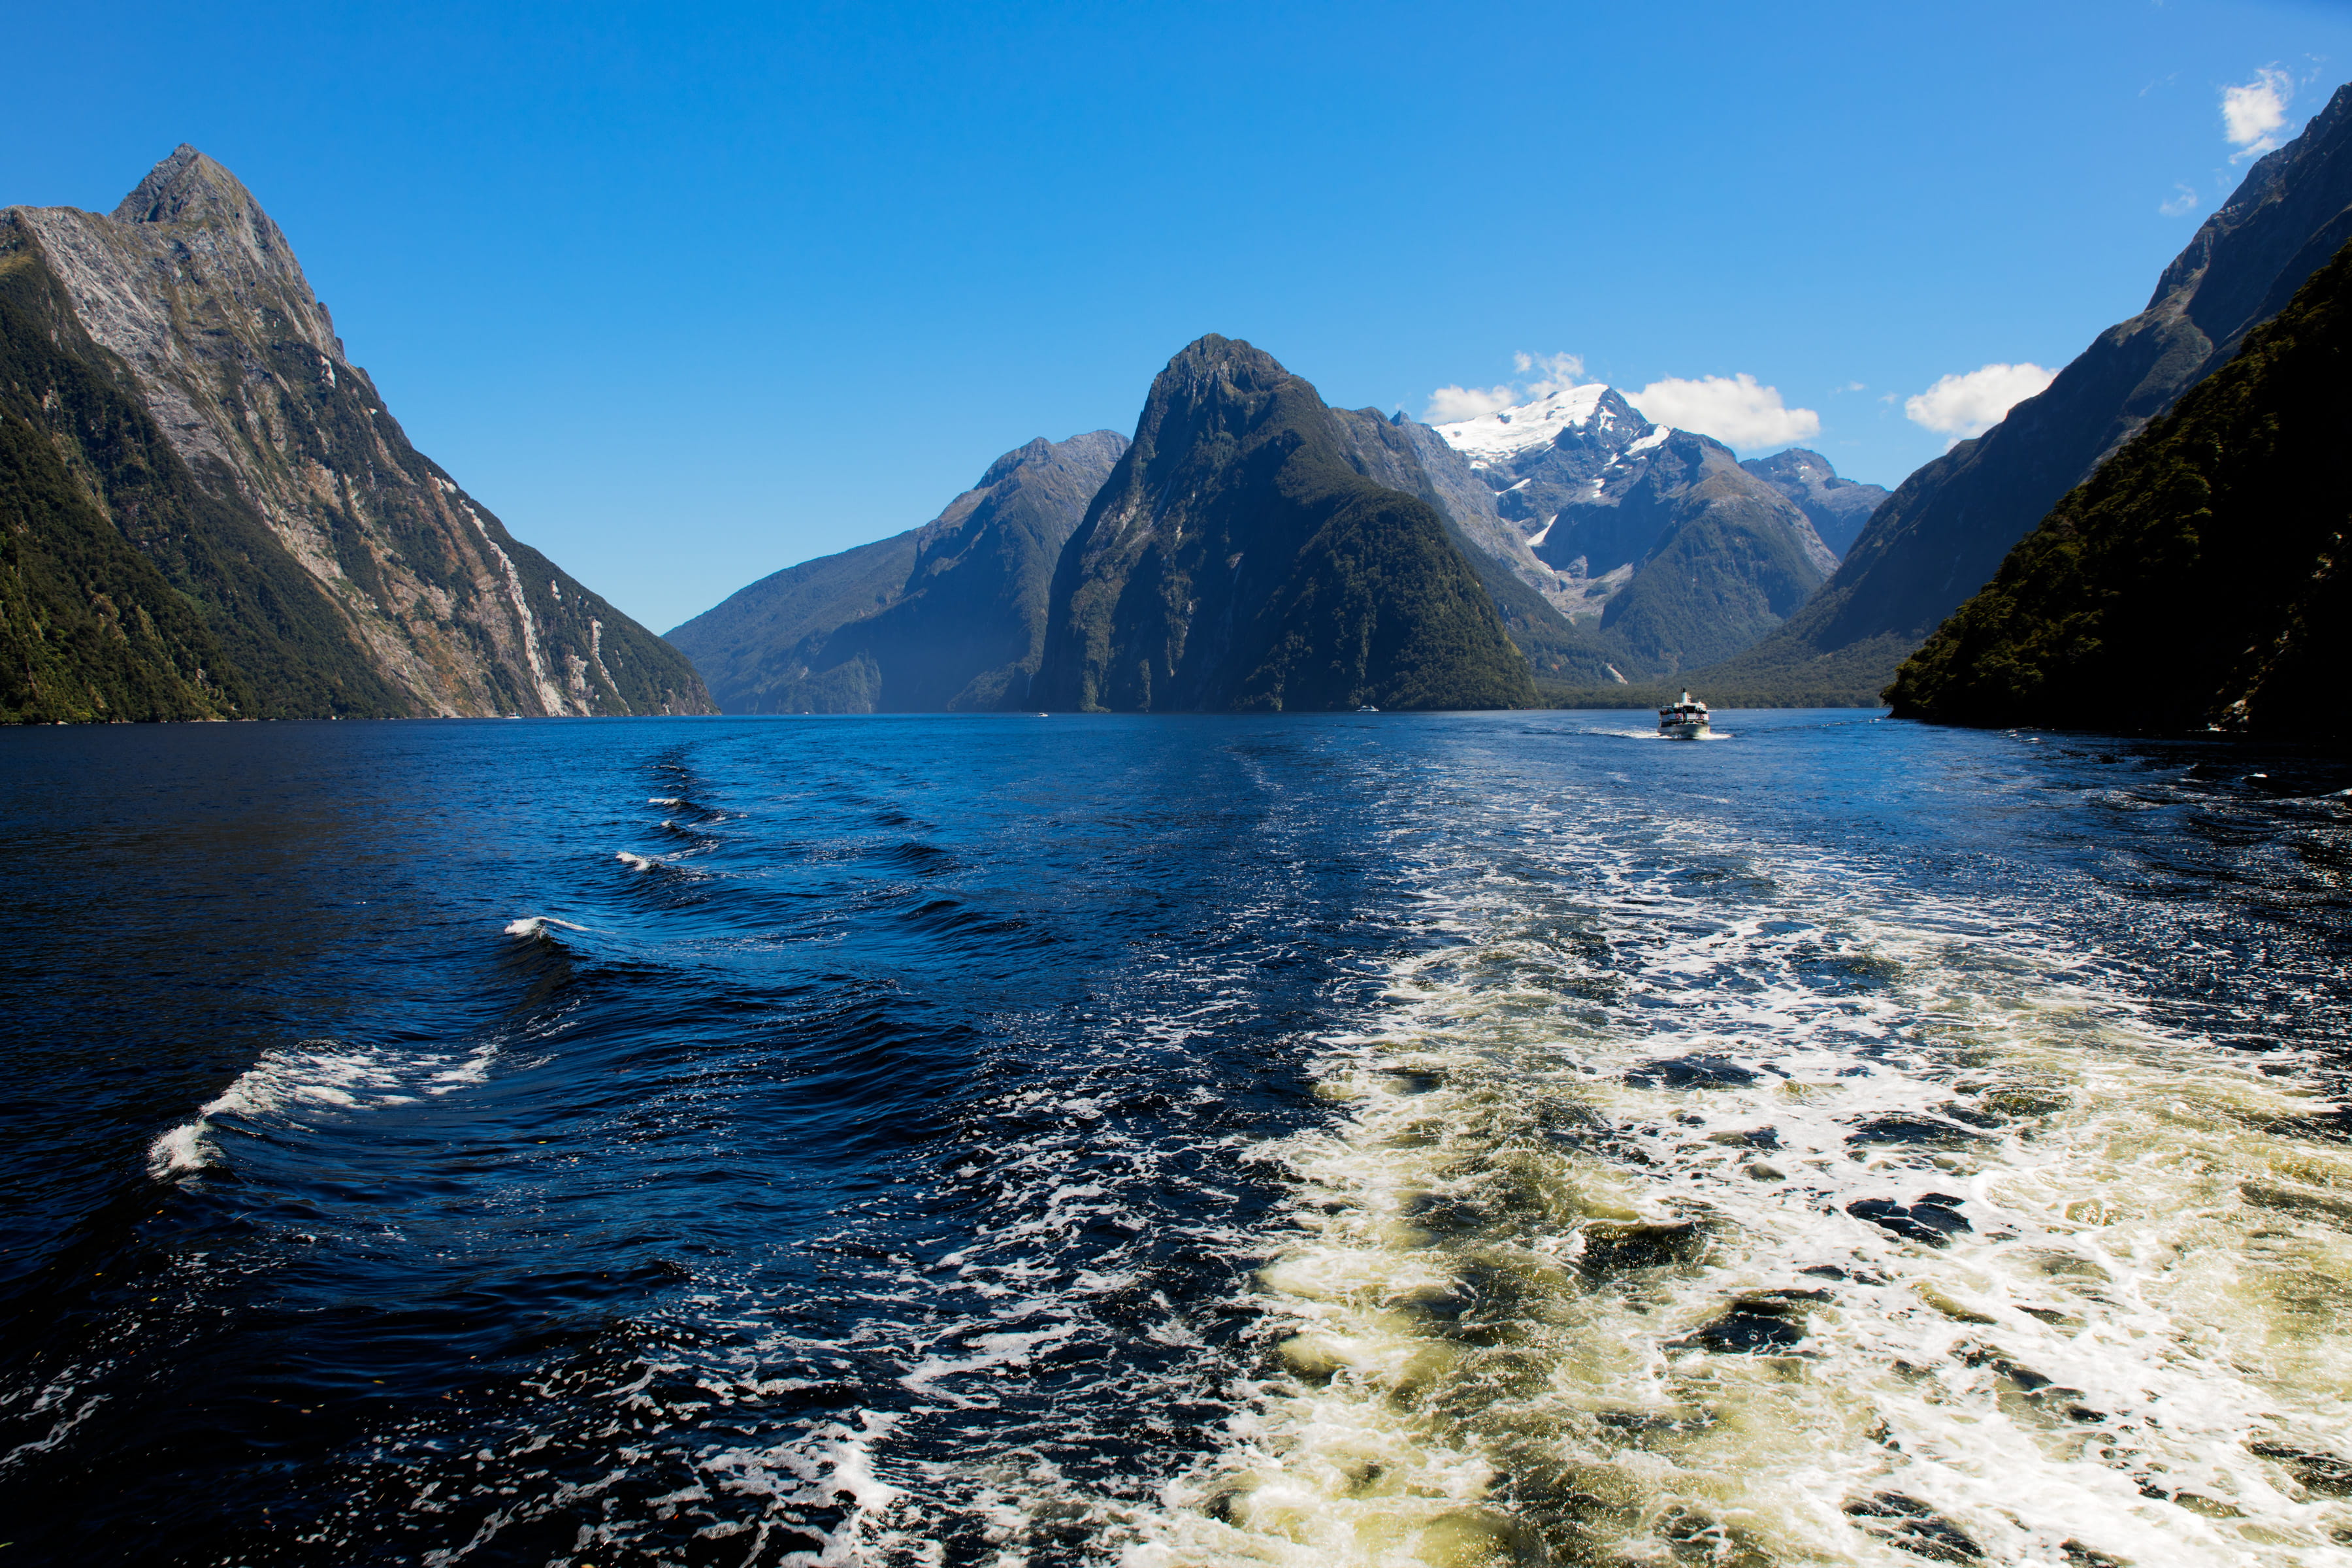 new zealand, milford sound, mountain, scenics - nature, water